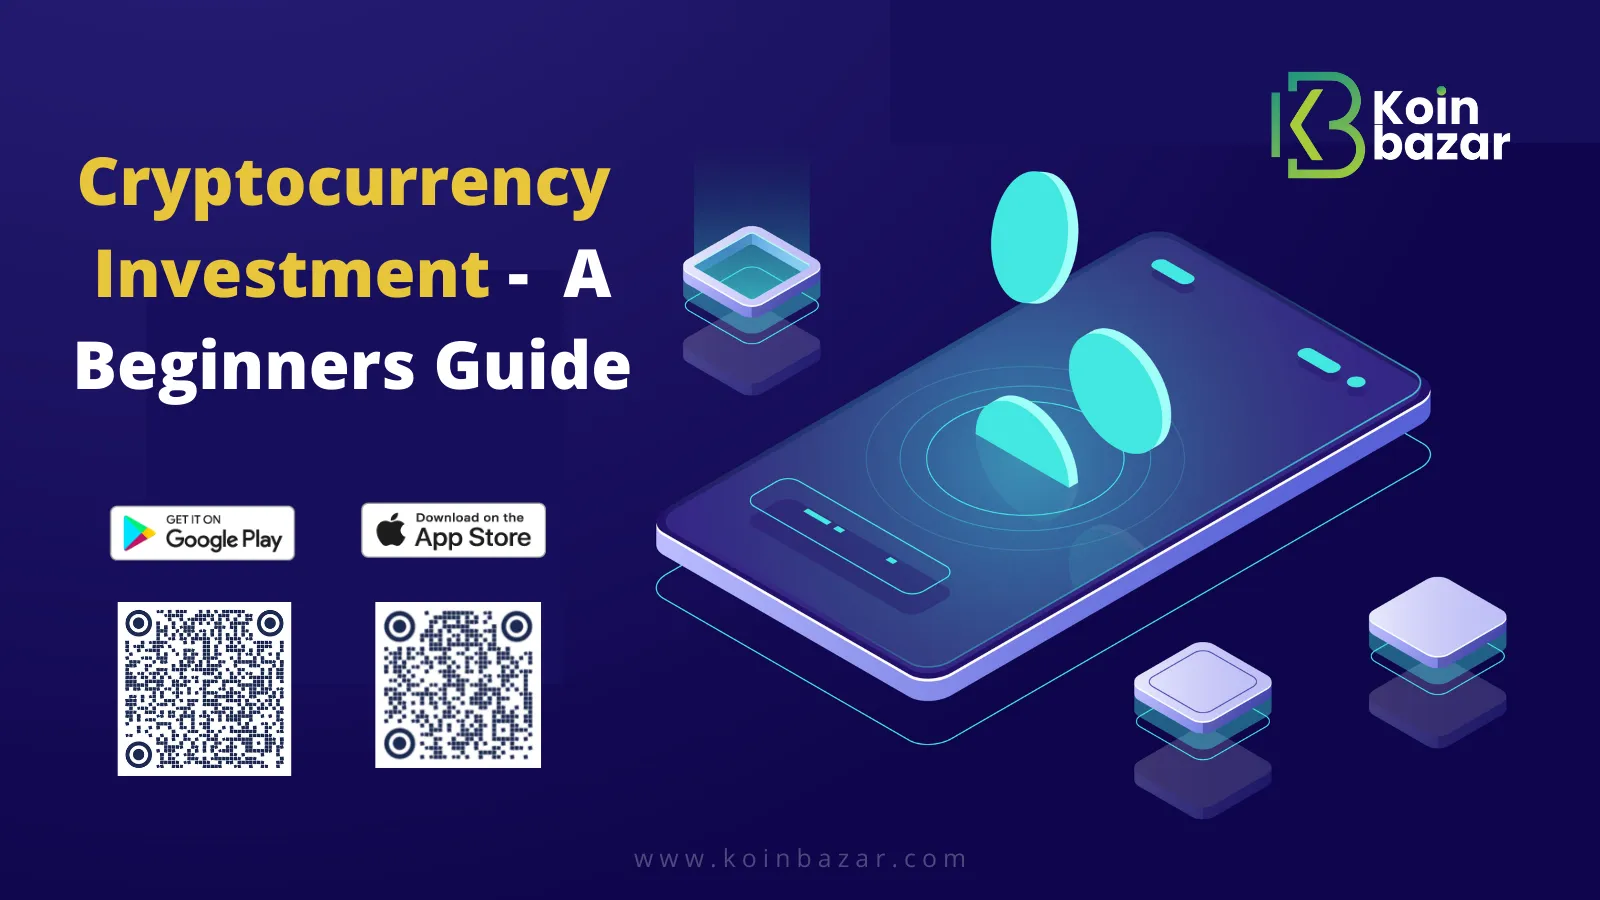 Cryptocurrency Investment - A Beginners Guide